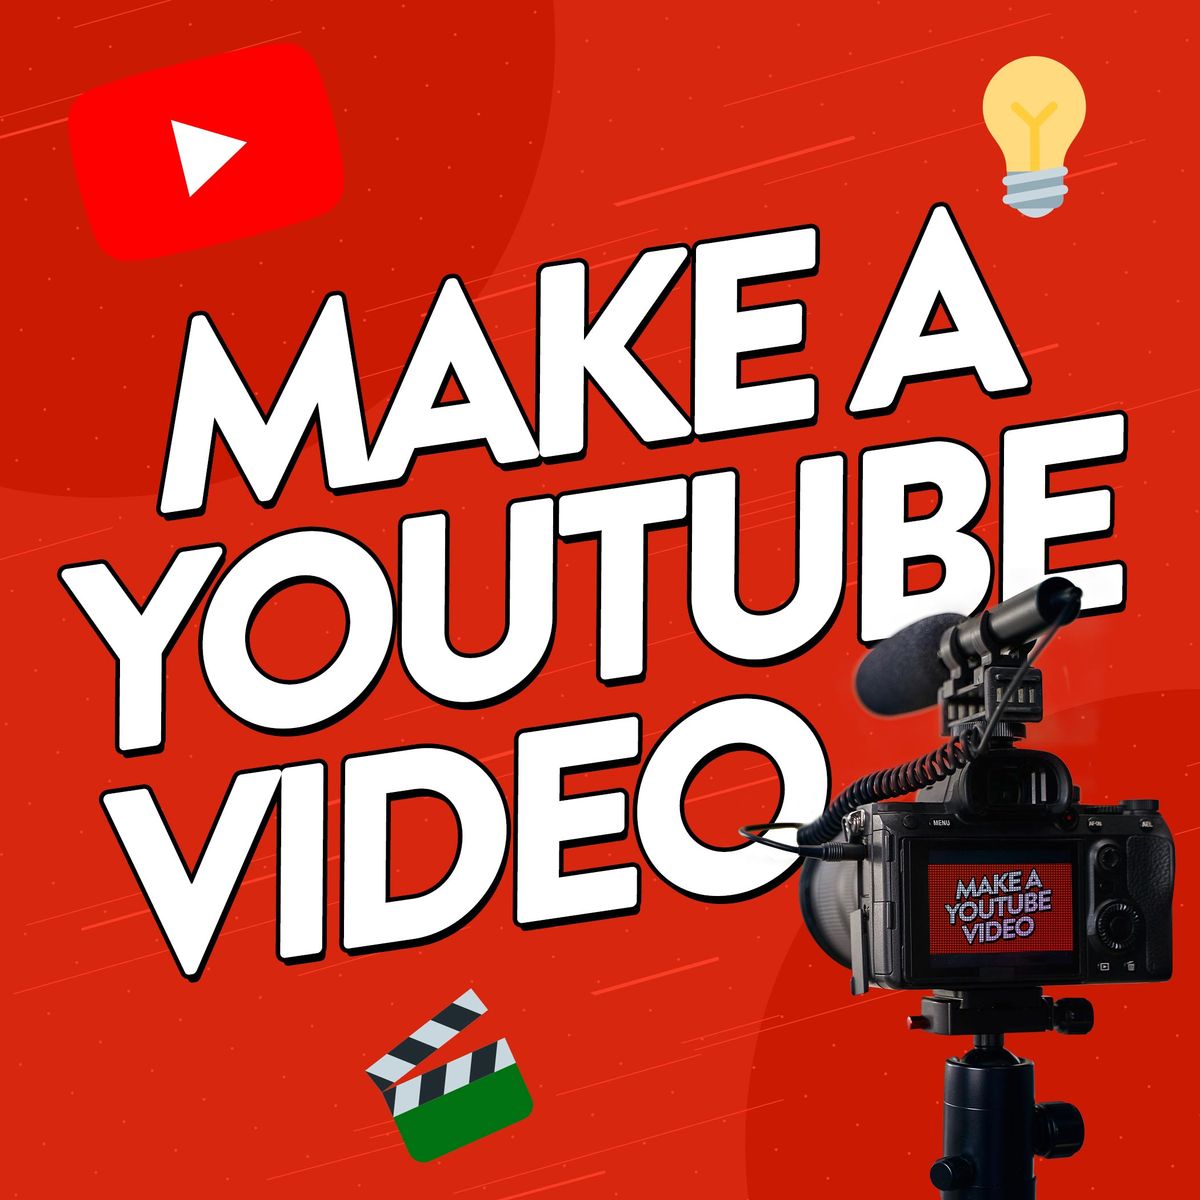 Image of a camera set up to film in front of text that says 'Make a YouTube video.'